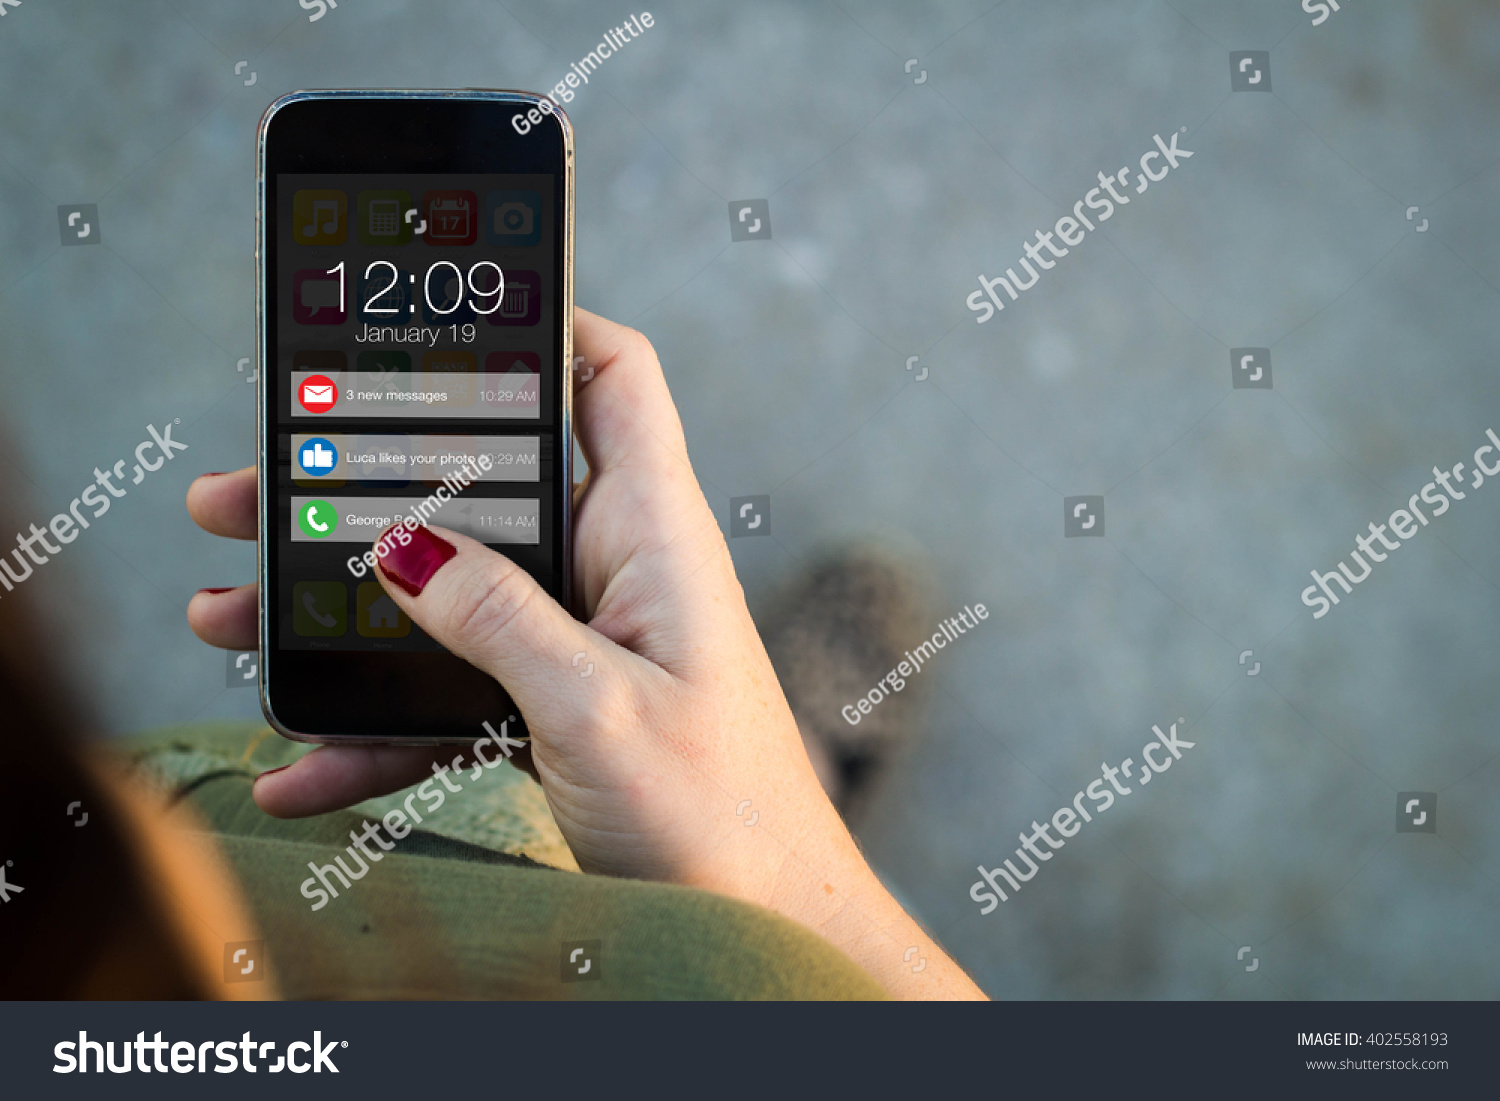 connectivity concept: Top view of woman walking in the street using her mobile phone with notifications on screen. All screen graphics are made up. #402558193